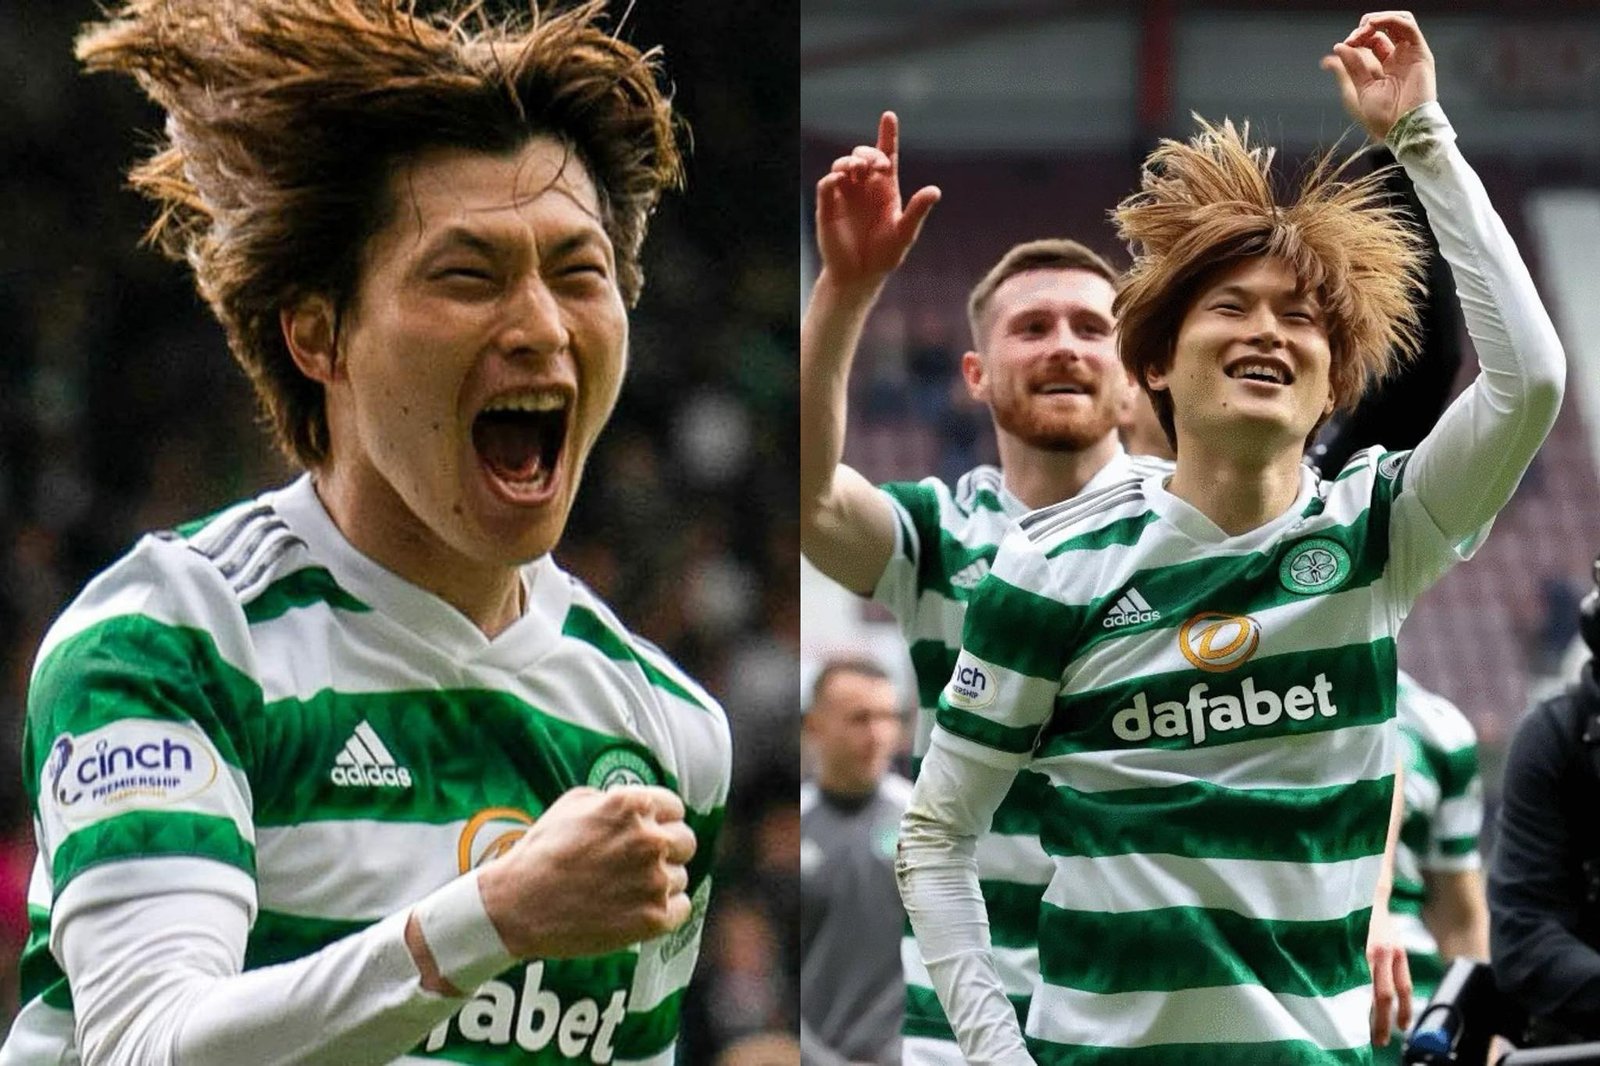 Breaking News: Celtic Fc has found an alternative plan for Kyogo Furuhashi if his absent from the team next year